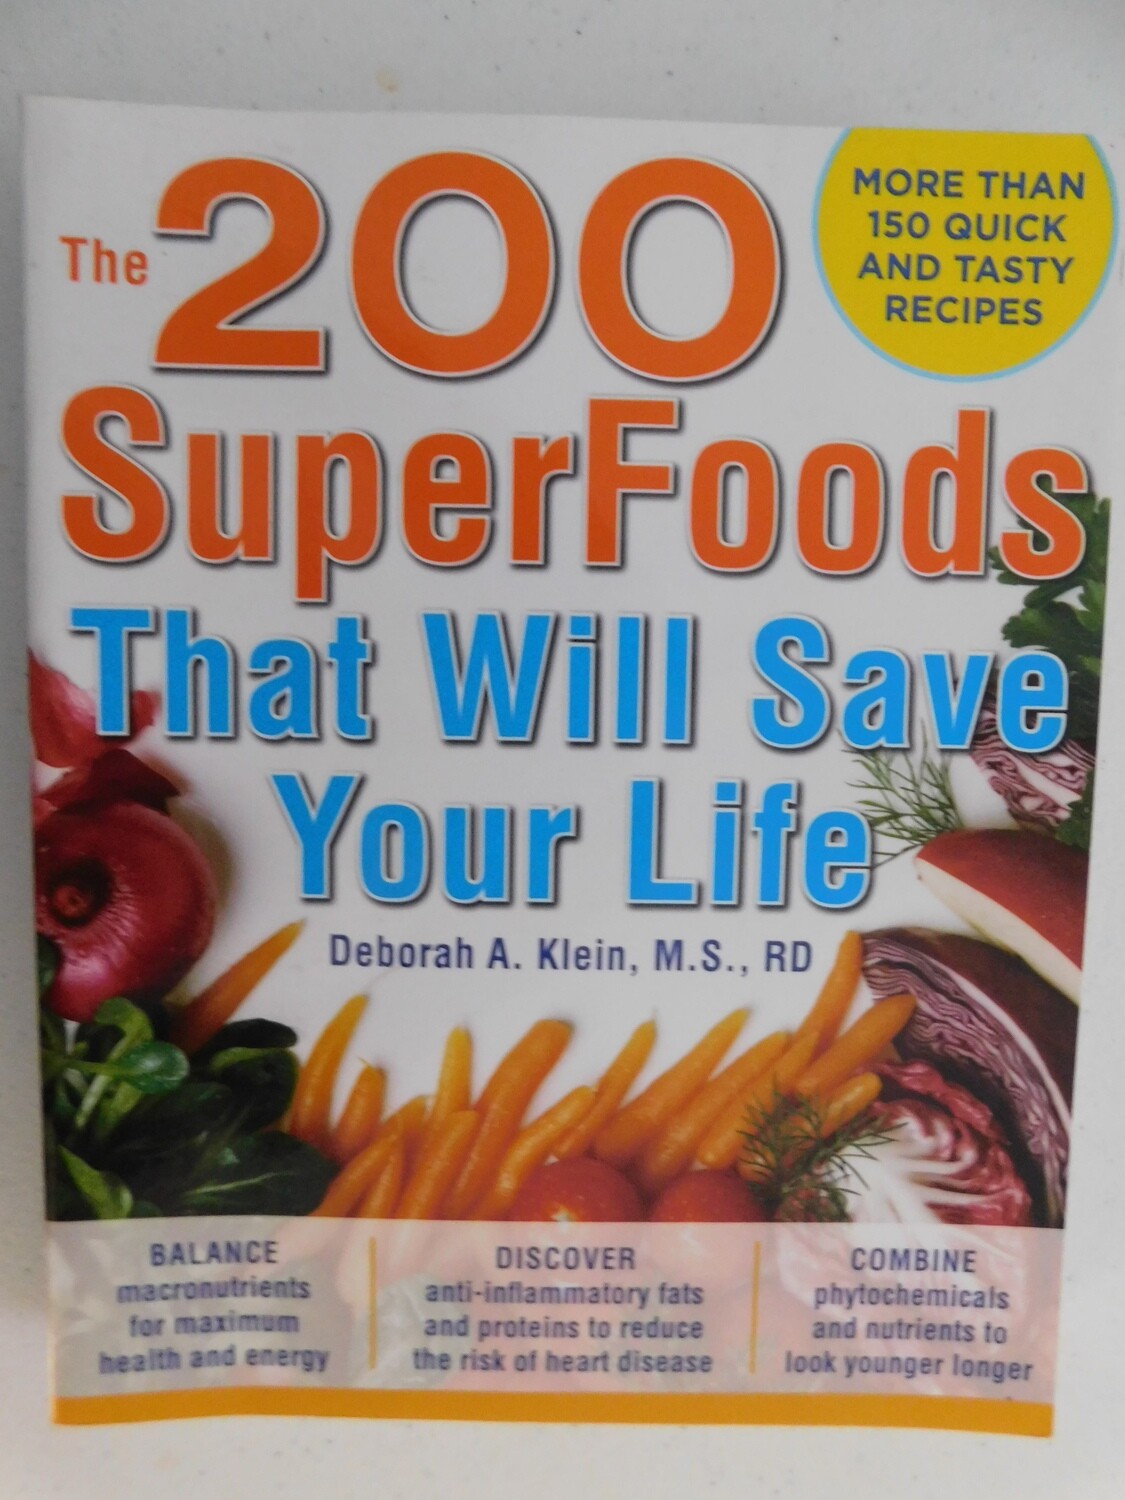 The 200 Superfoods That Will Save Your Life